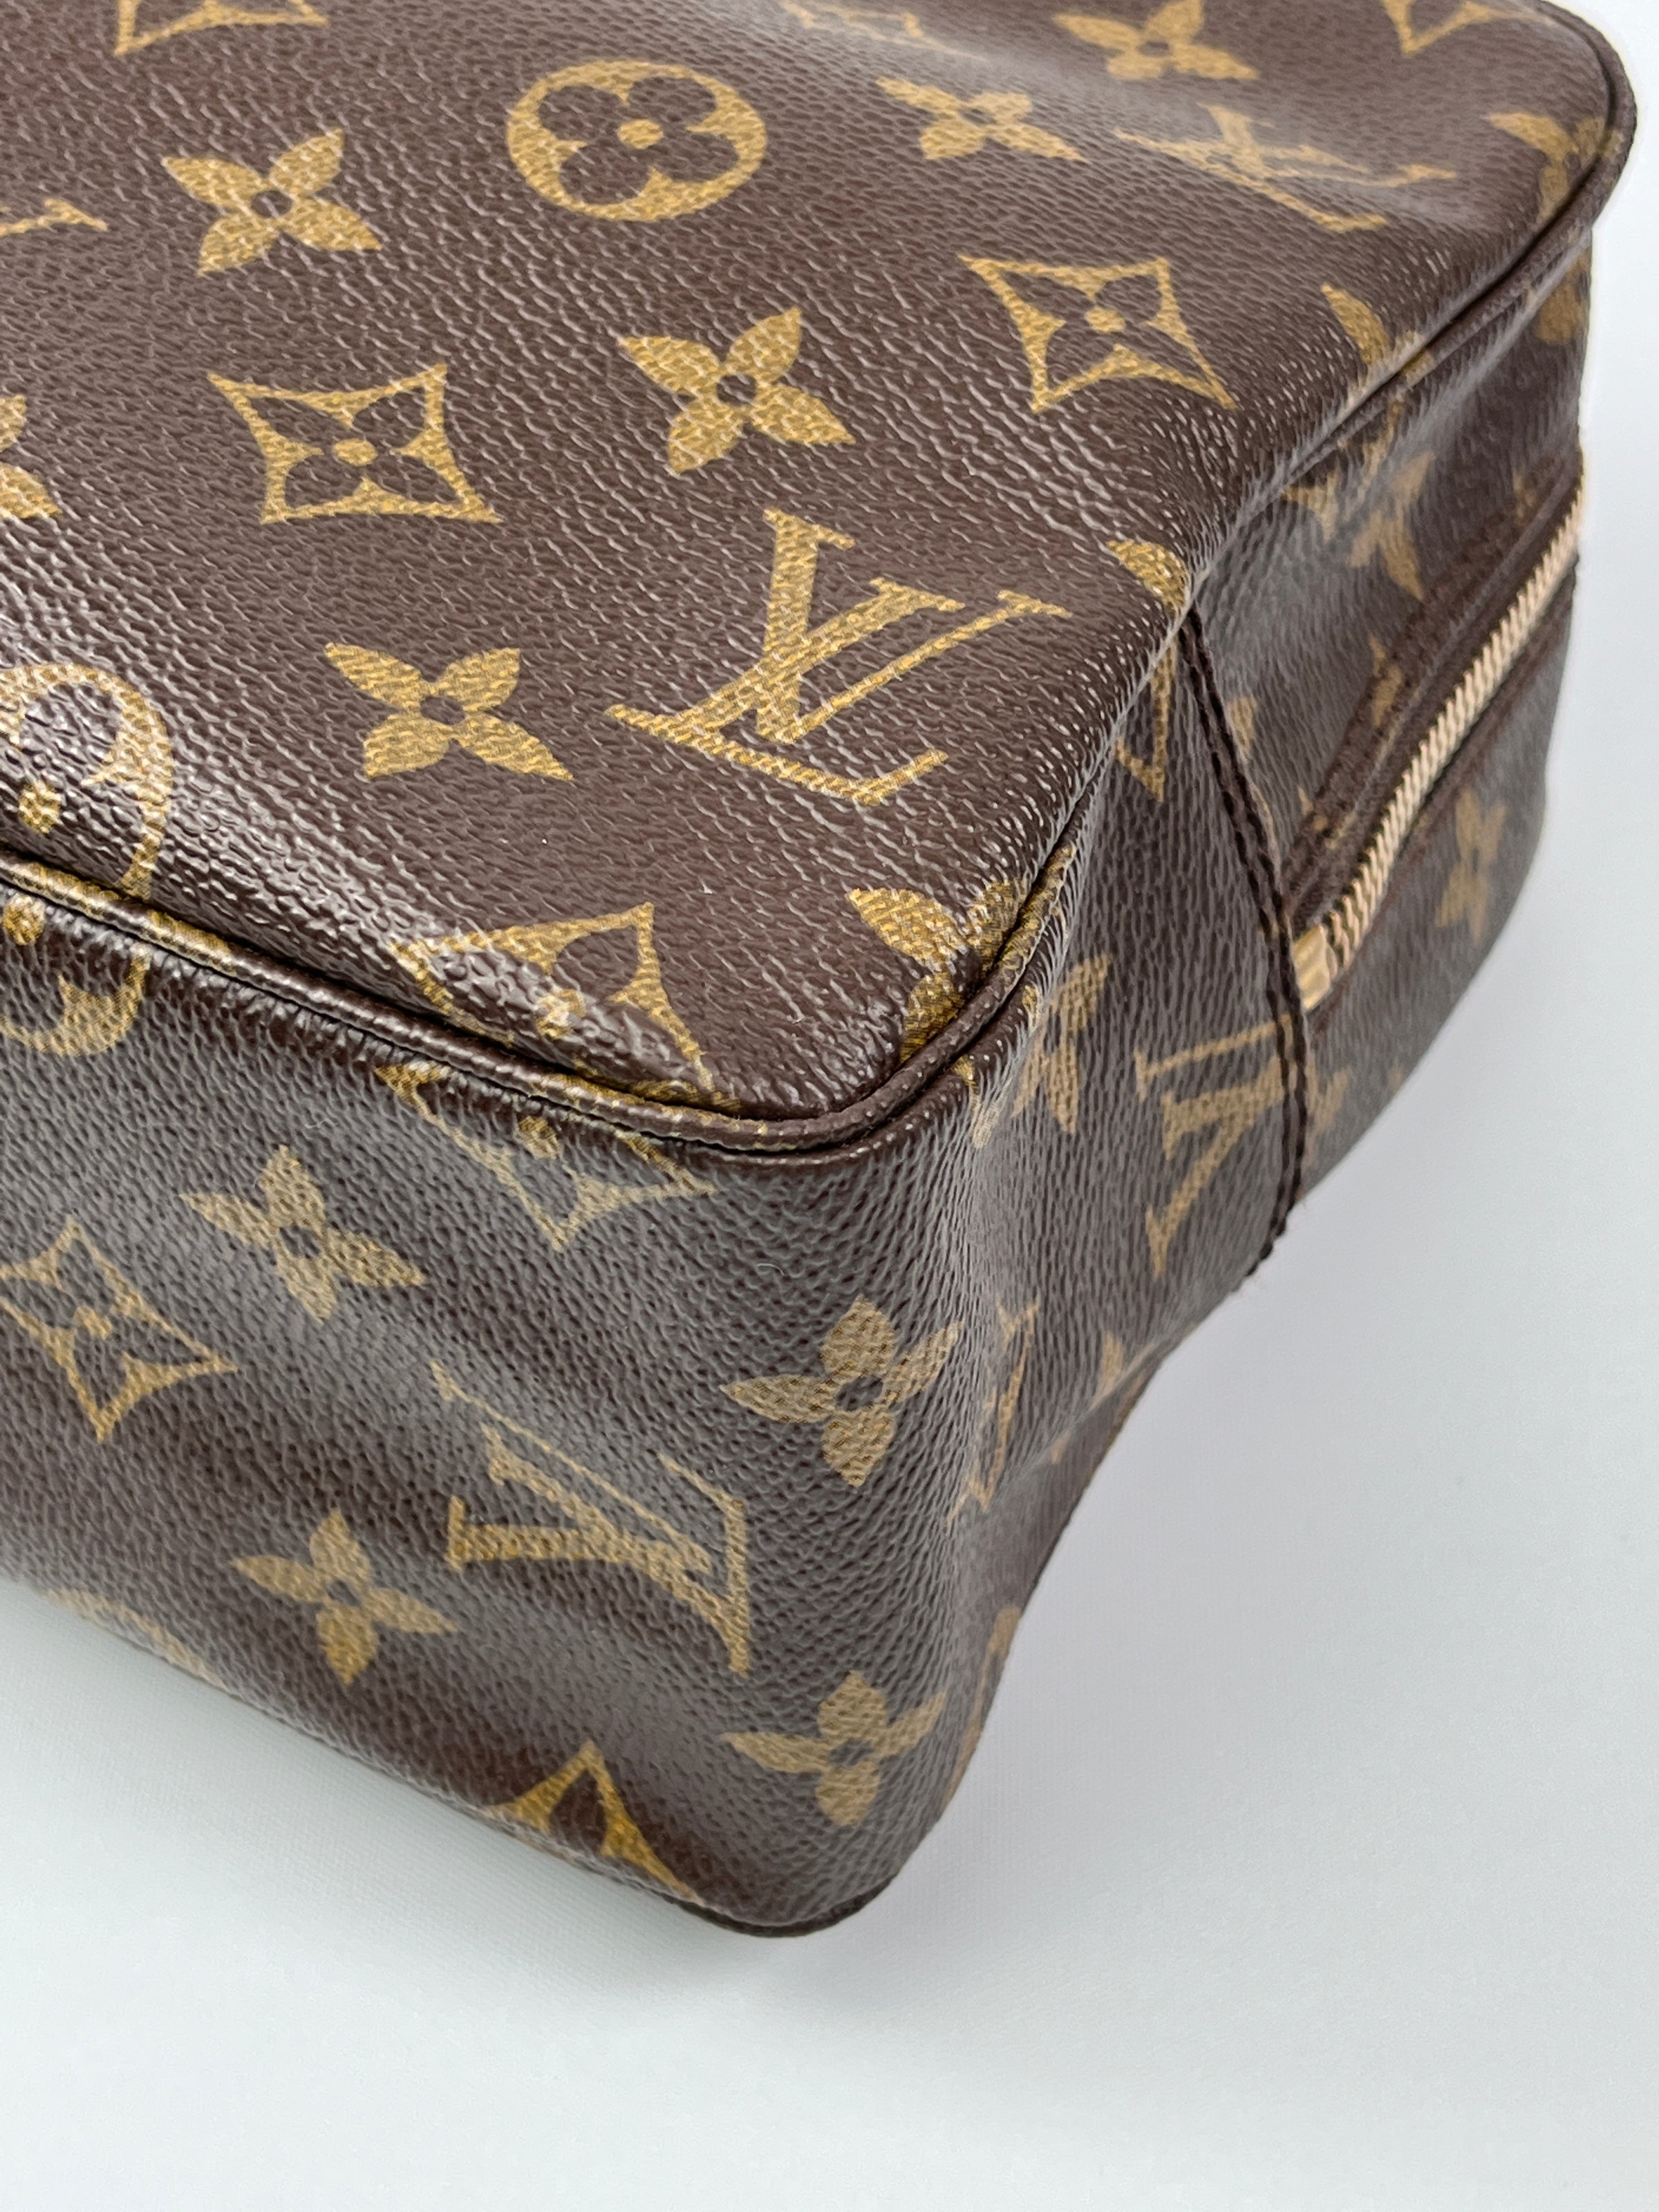 The Luxury Shopper - Louis Vuitton Toiletry Pouch sourced for a VIP in  Australia 🇦🇺 +447956049044 📱 hello@theluxuryshopper.co.uk 📩  www.theluxuryshopper.co.uk 🖥 Worldwide shipping 🌍